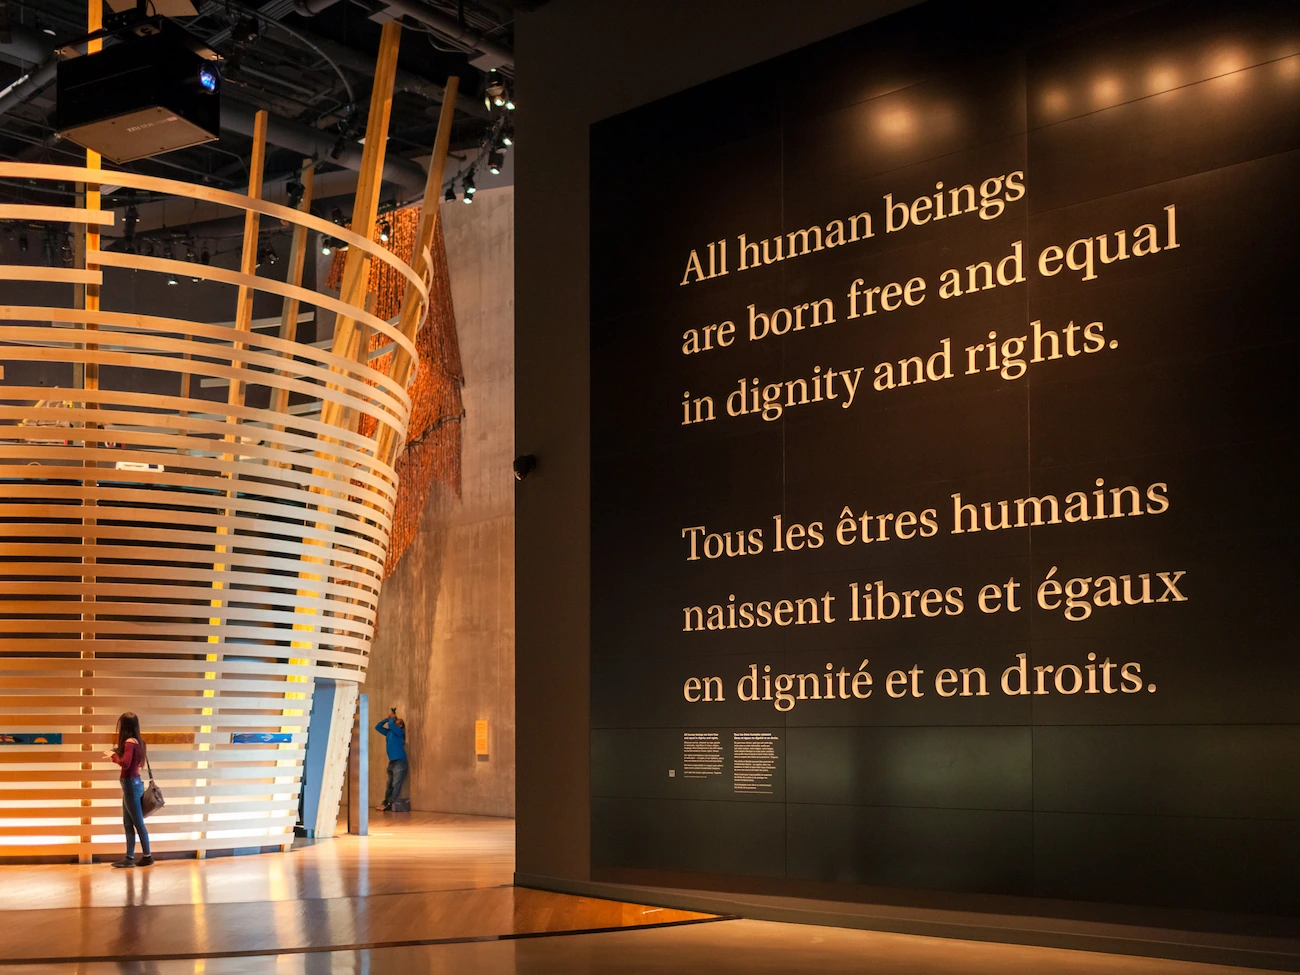 Huge sign in french museum saying 'All human beings are born free and equal in dignity and rights.'